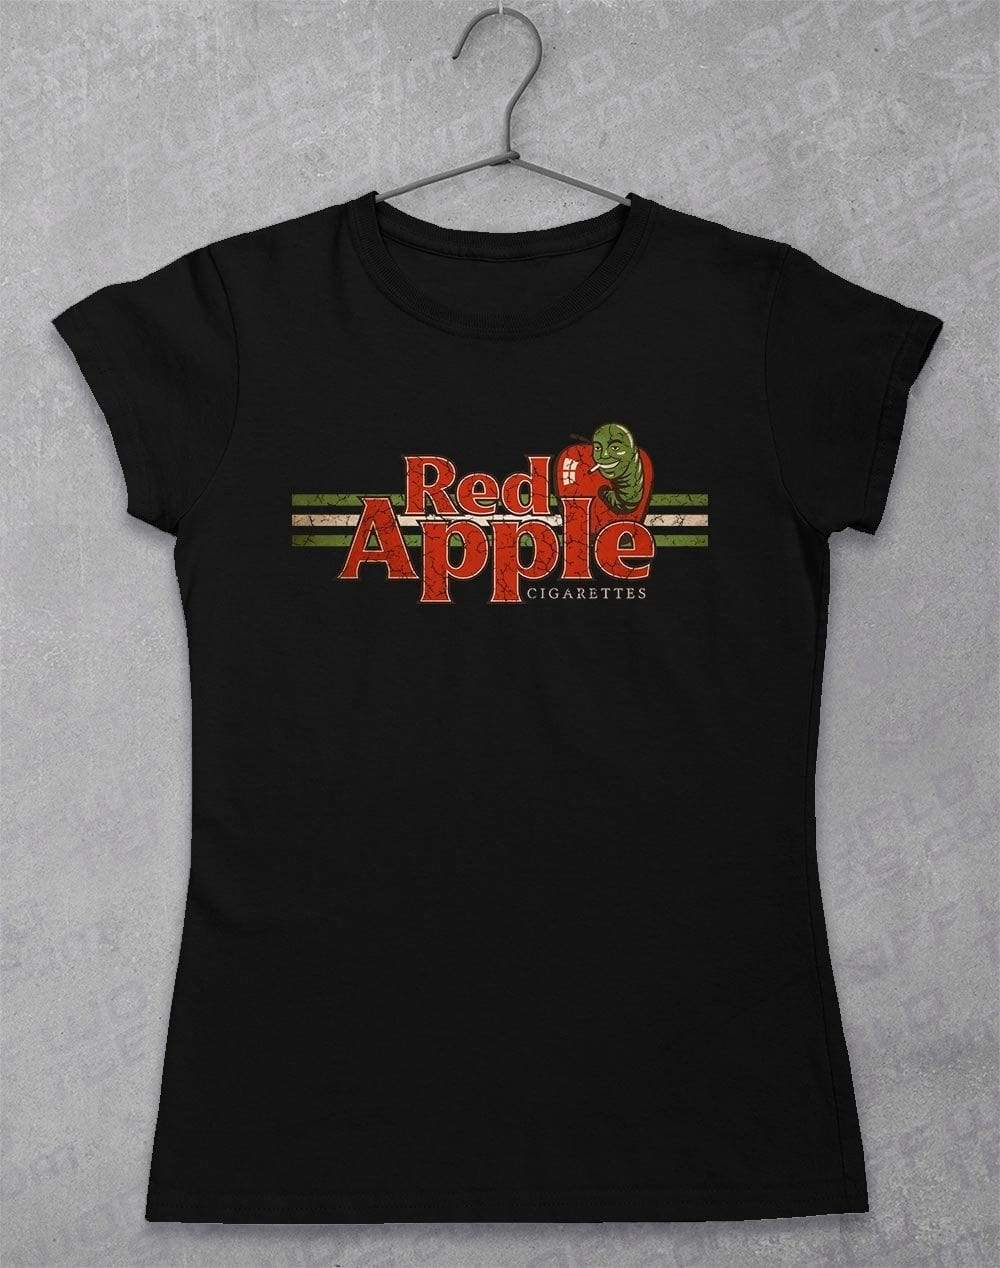 Red Apple Cigarettes Women's T-Shirt  - Off World Tees